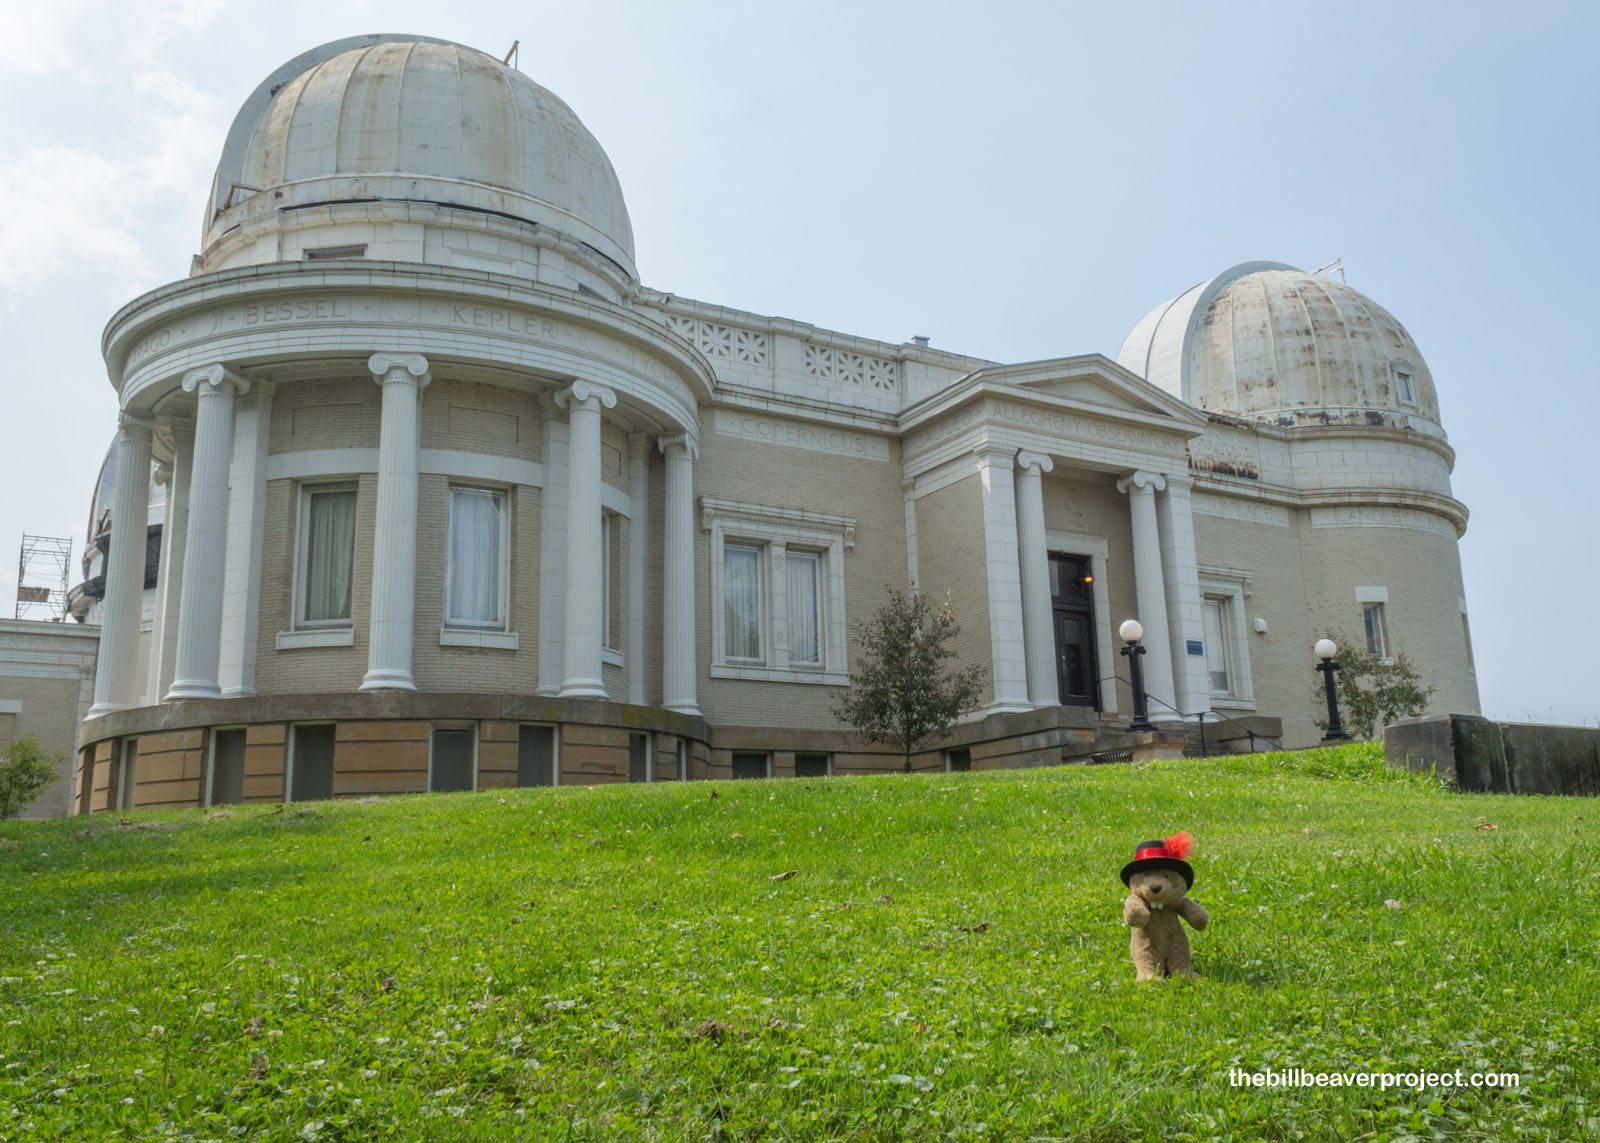 Another angle of the observatory!